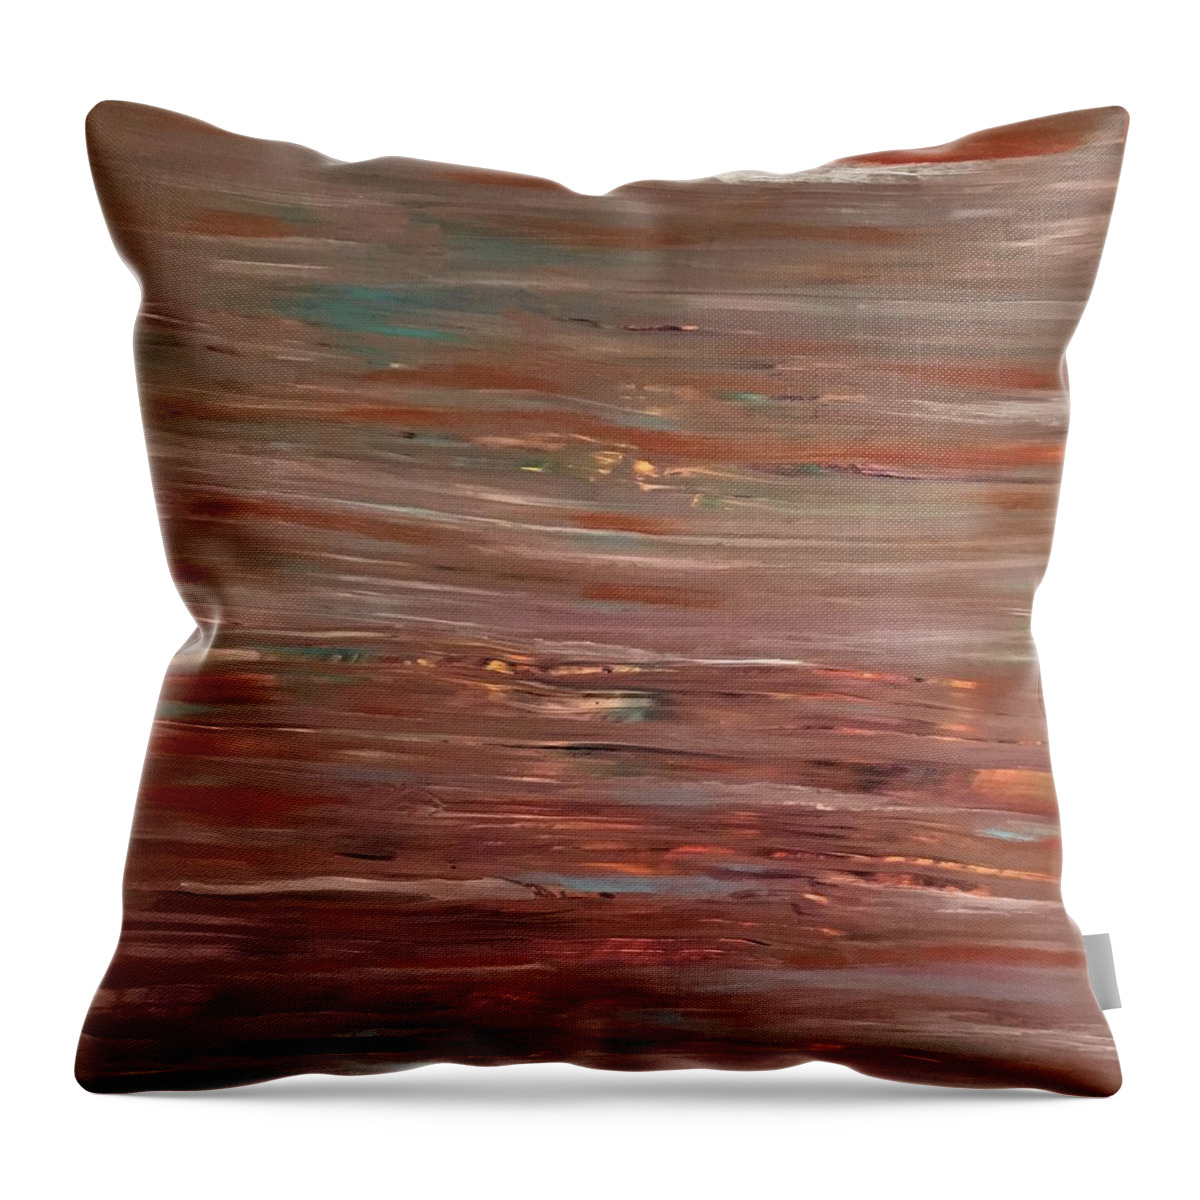 Abstract Throw Pillow featuring the photograph Nuance by Soraya Silvestri